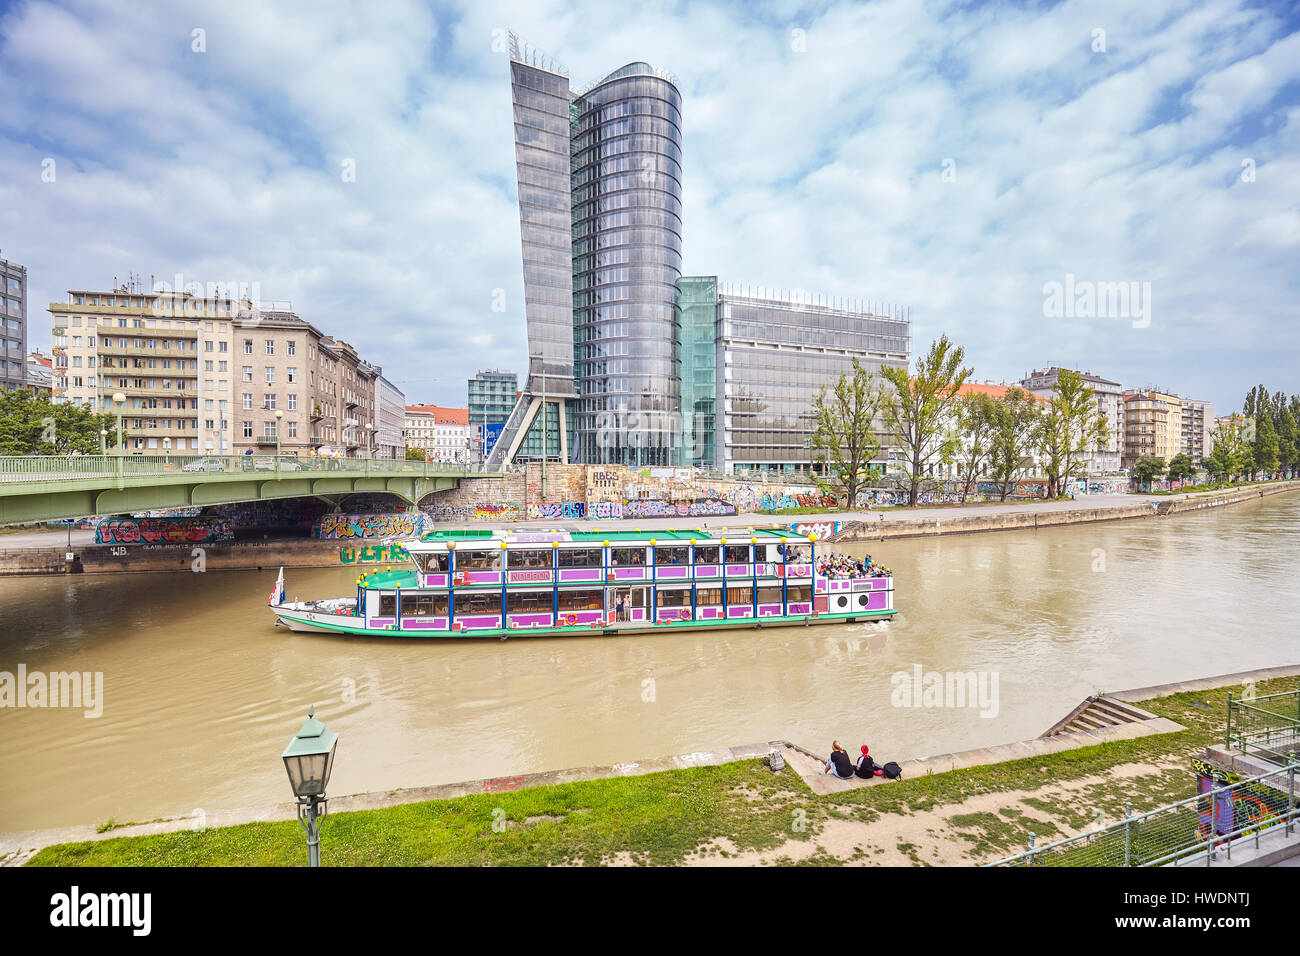 Vienna, Austria - August 15, 2016: Sightseeing tour ship on the Donaukanal (Danube Canal), former arm of the river Danube. Stock Photo